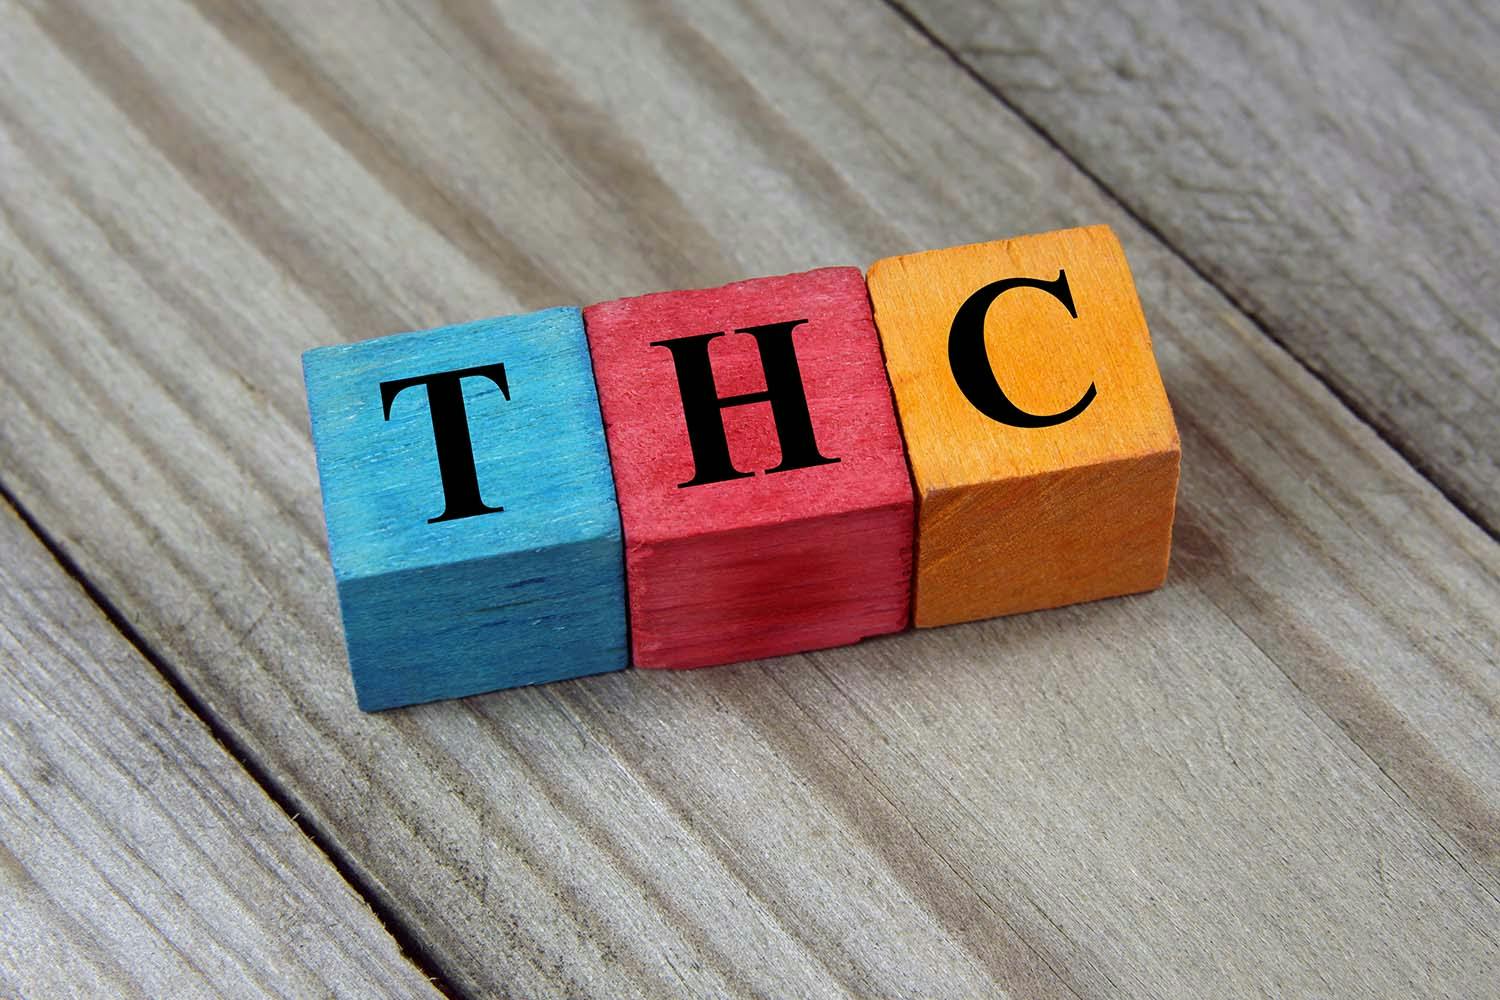 What Is THC featured image on wood table